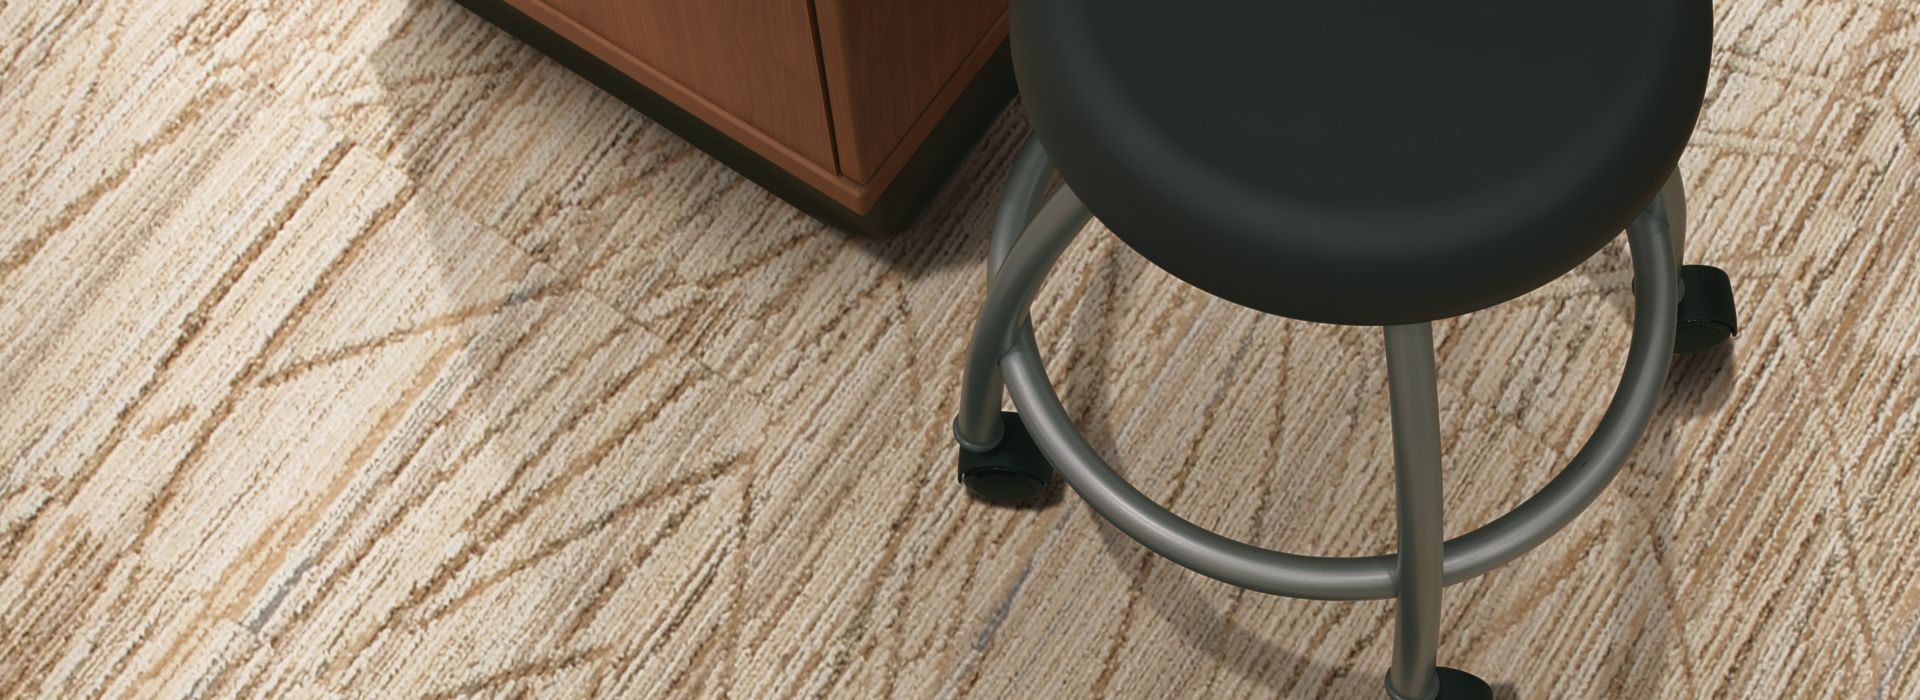 Interface Prairie Grass carpet tile in close up view with stool and cabinet